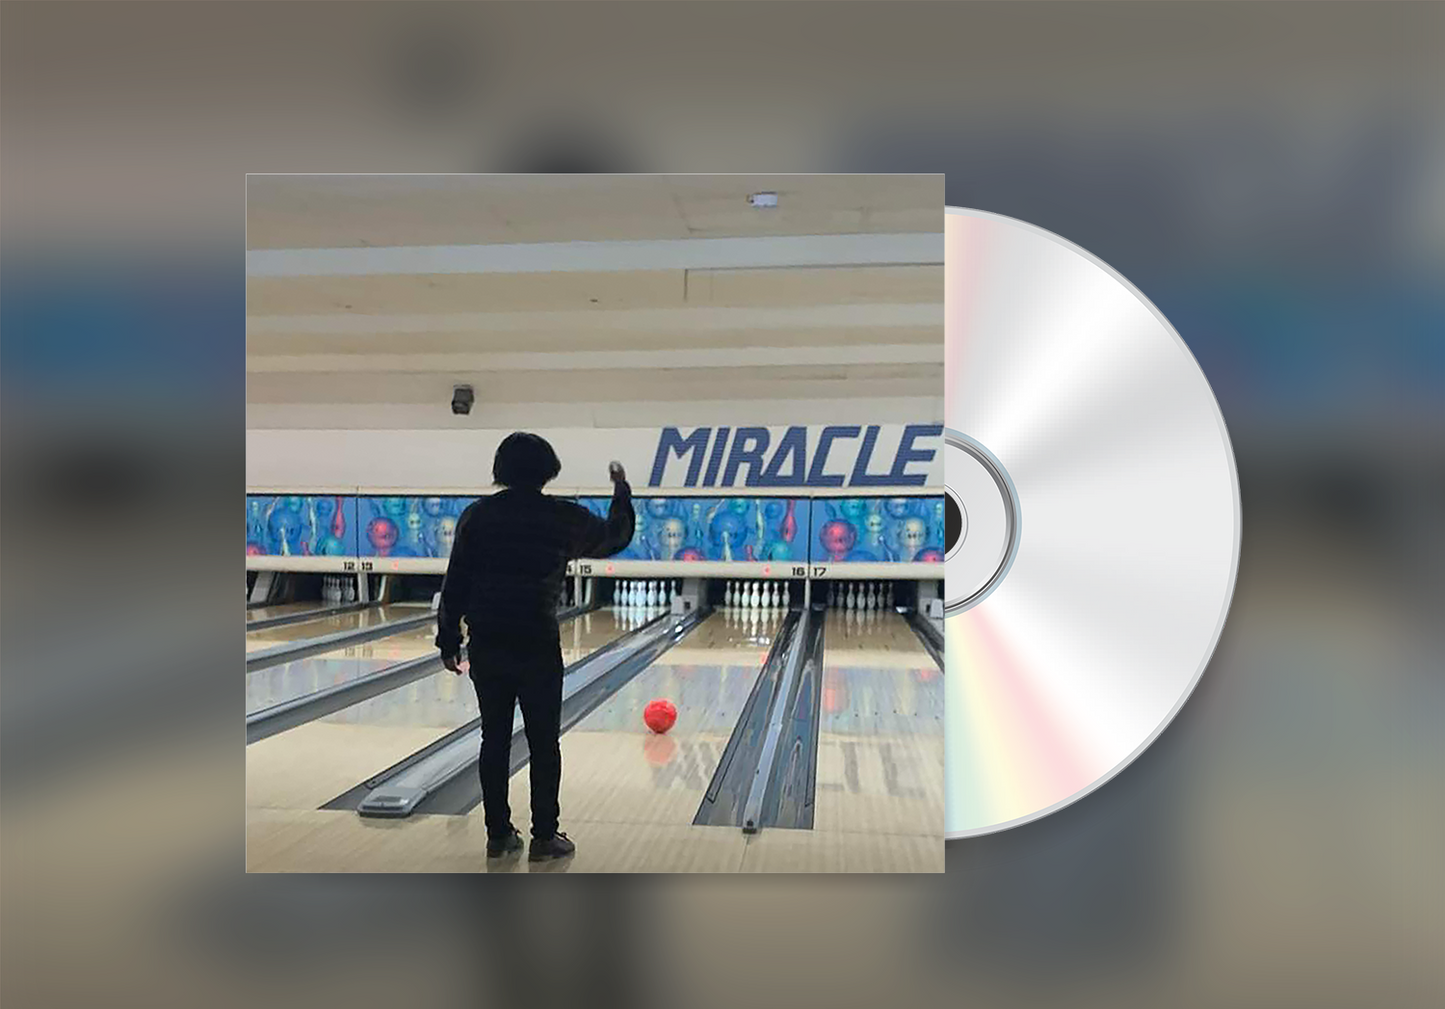 Equipment - Miracle EP